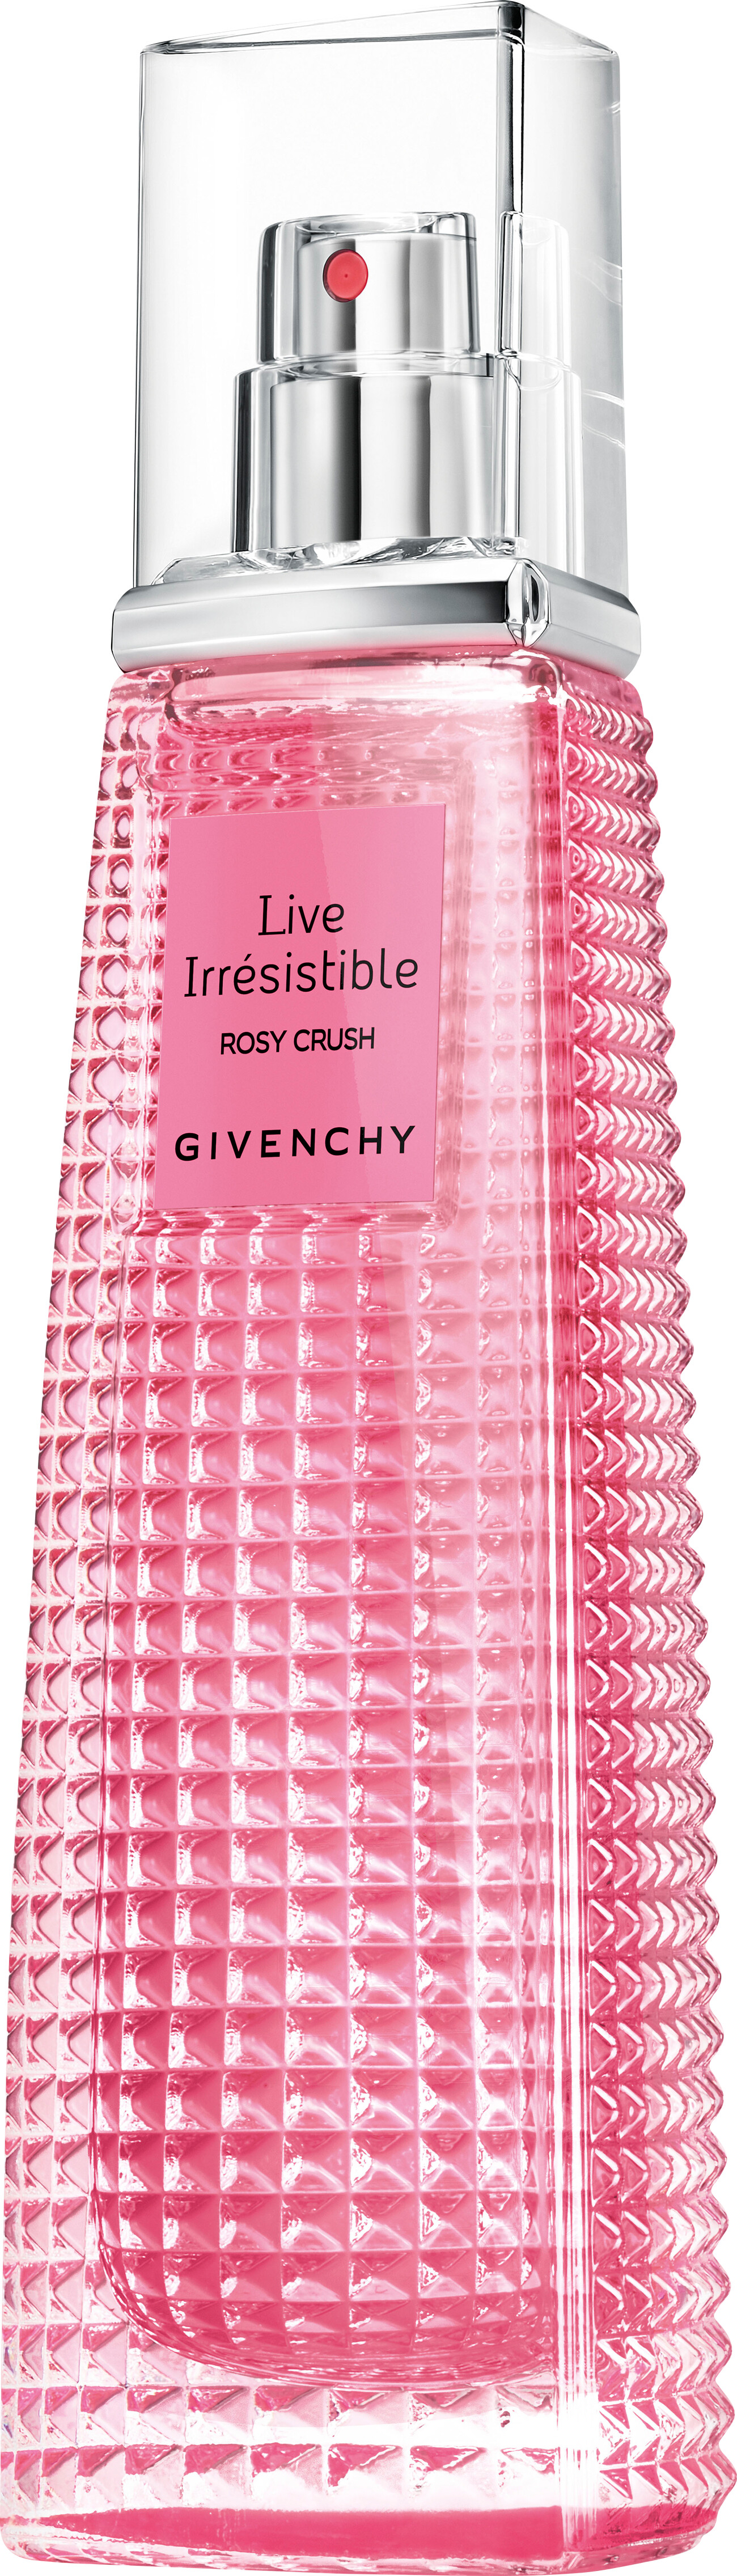 GIVENCHY Live Irresistible Rosy Crush 